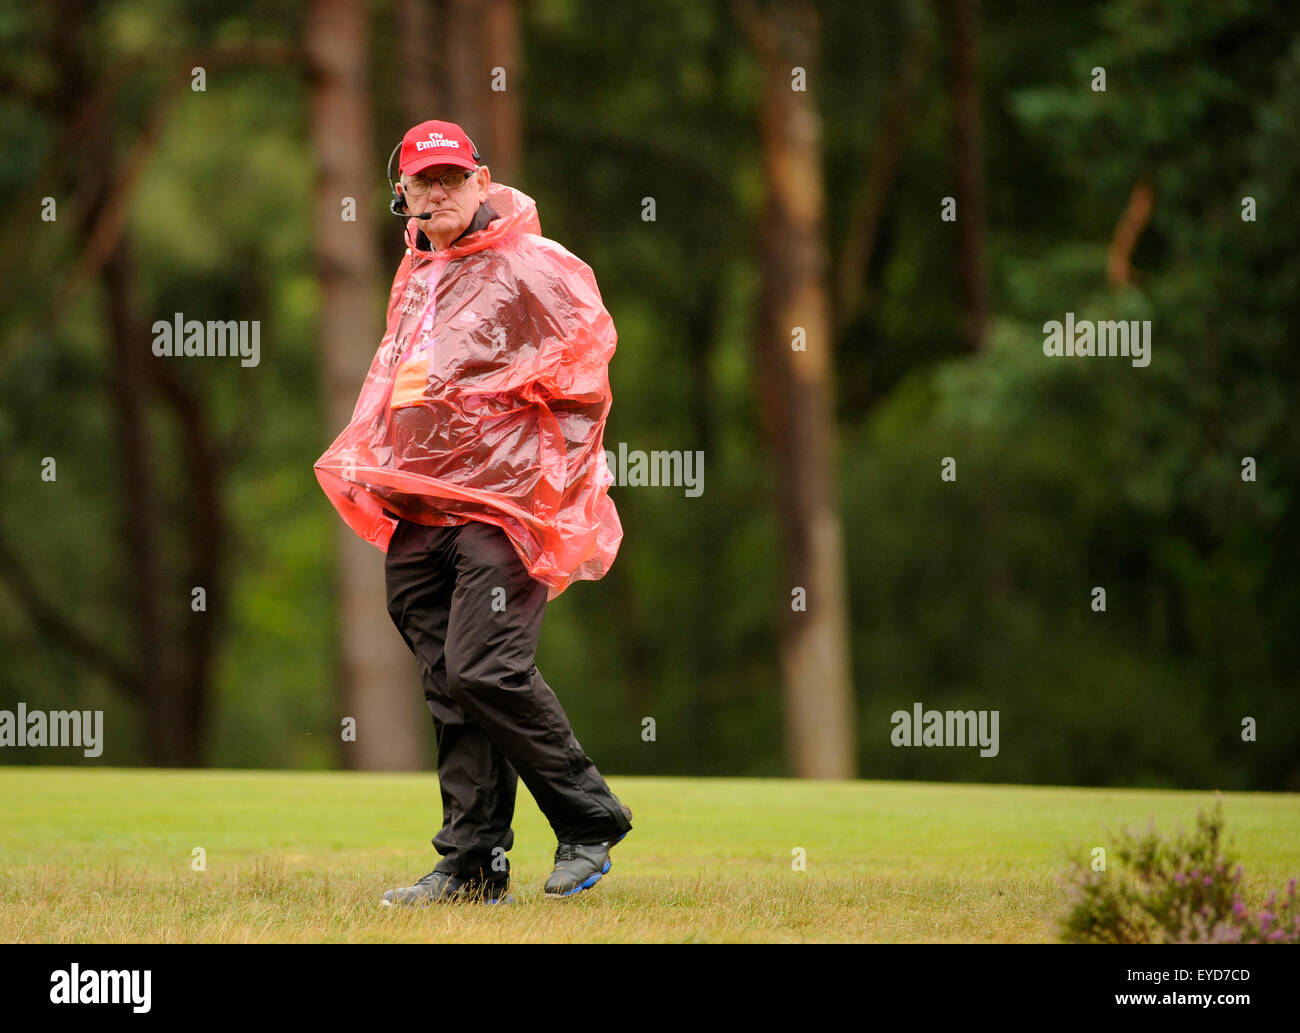 Sunningdale, UK. 26th July, 2015. A marshal braves the elements during a wet final round at The Senior Open Championship at Sunningdale Golf Club on July 26, 2015 in Sunningdale, England. Credit:  David Partridge/Alamy Live News Stock Photo